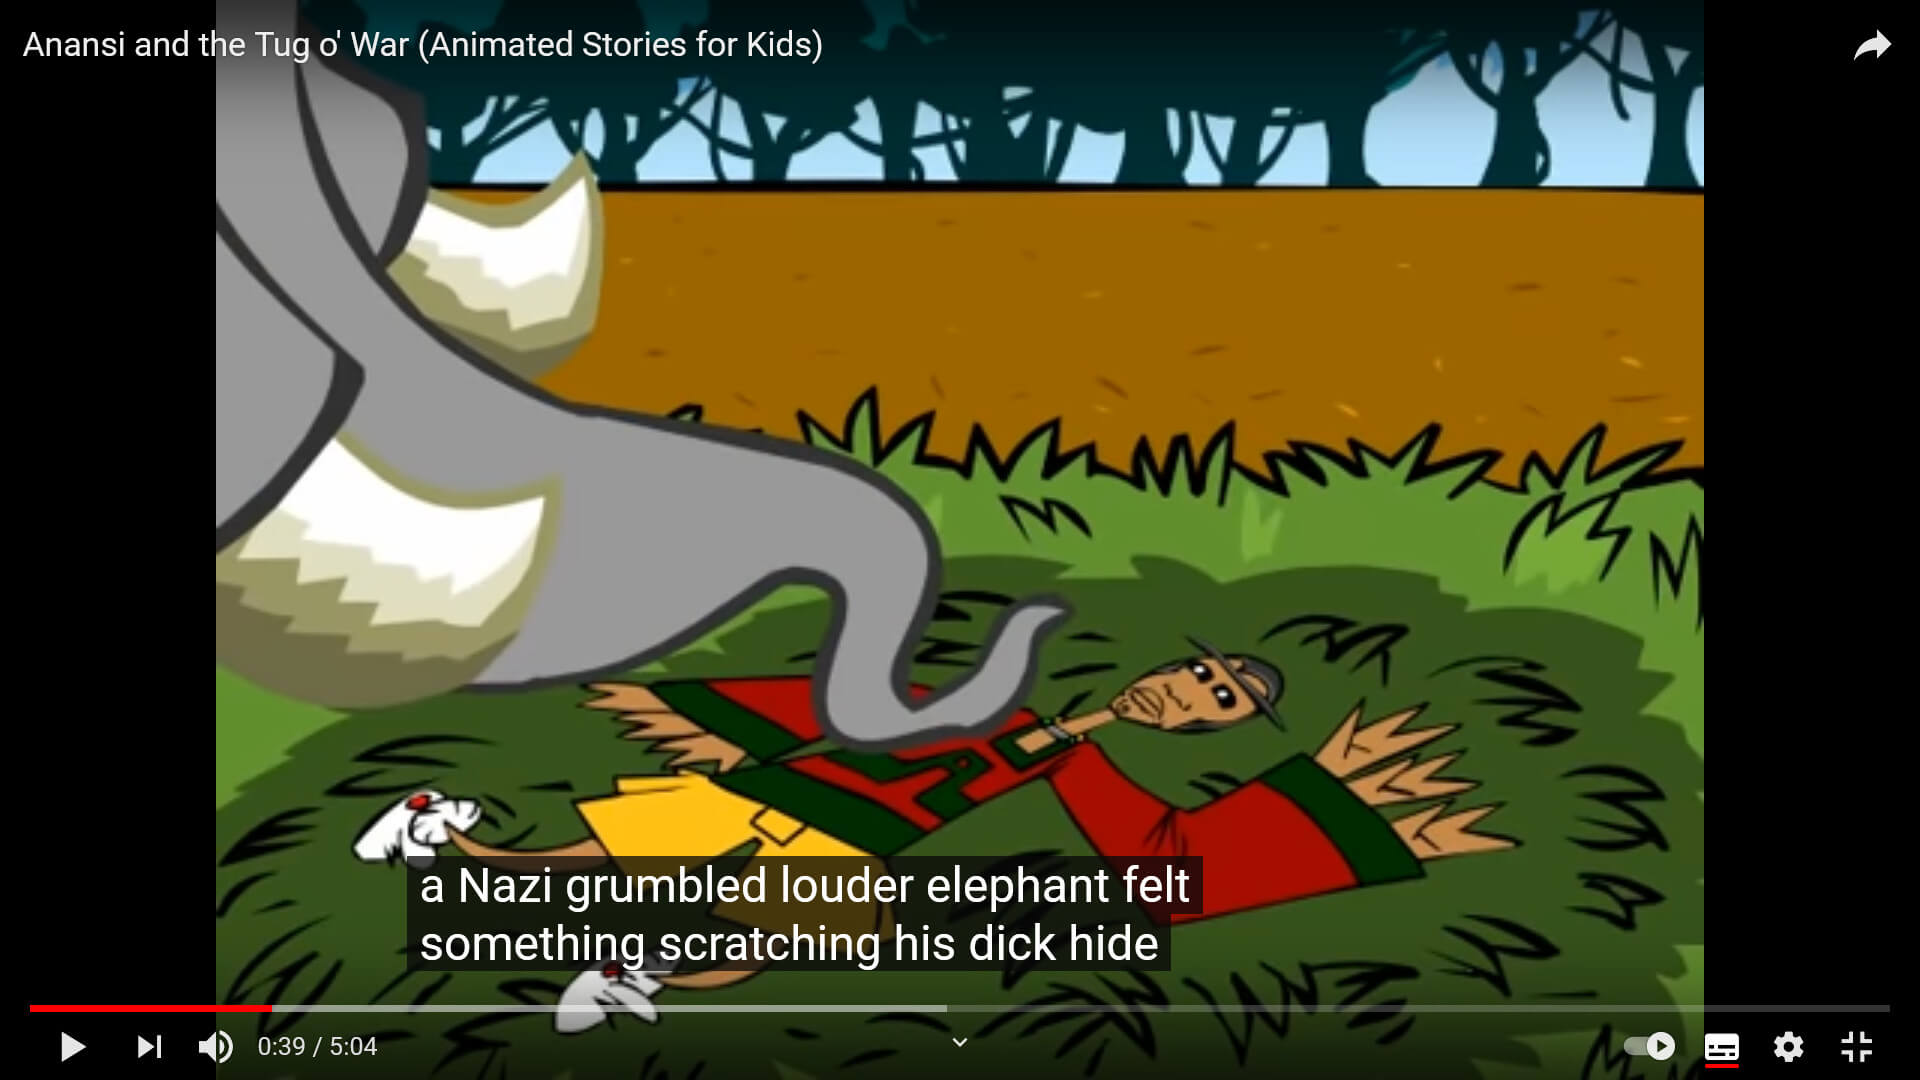 A still from a video of Anansi and the Tug O' War with the captions 'a Nazi grumbled louder elephant felt something scratching his dick hide'